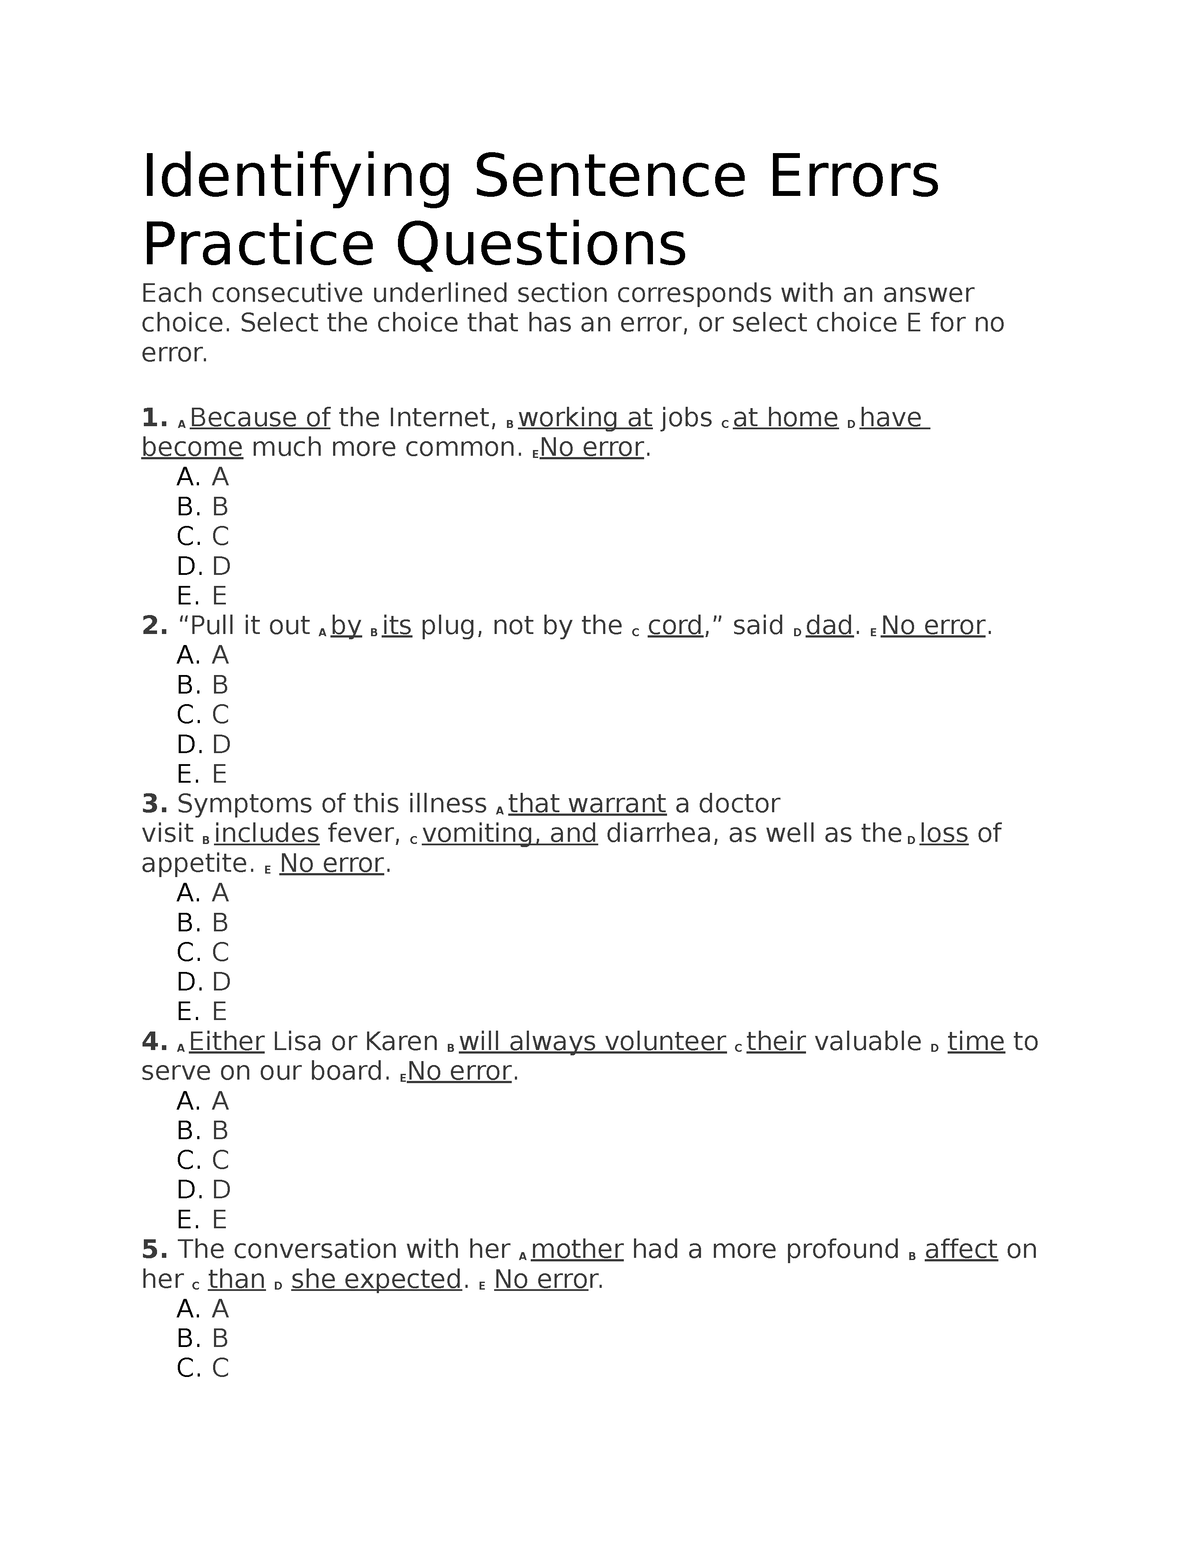 identifying-erros-identifying-sentence-errors-practice-questions-each-consecutive-underlined